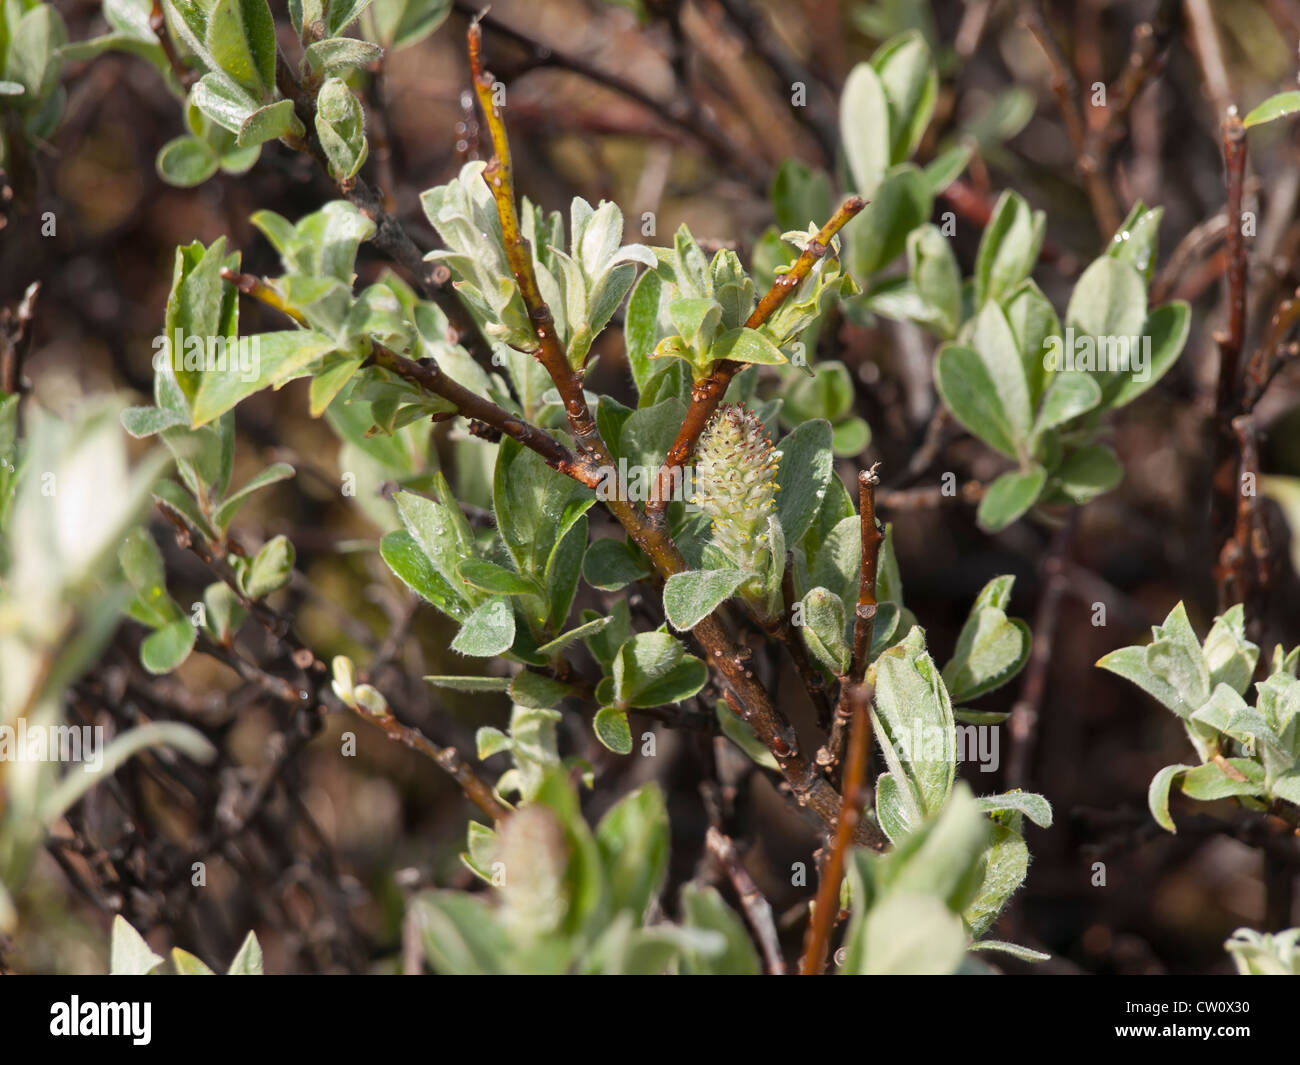 Detail of a salix species from Dovre national park, Norway Stock Photo